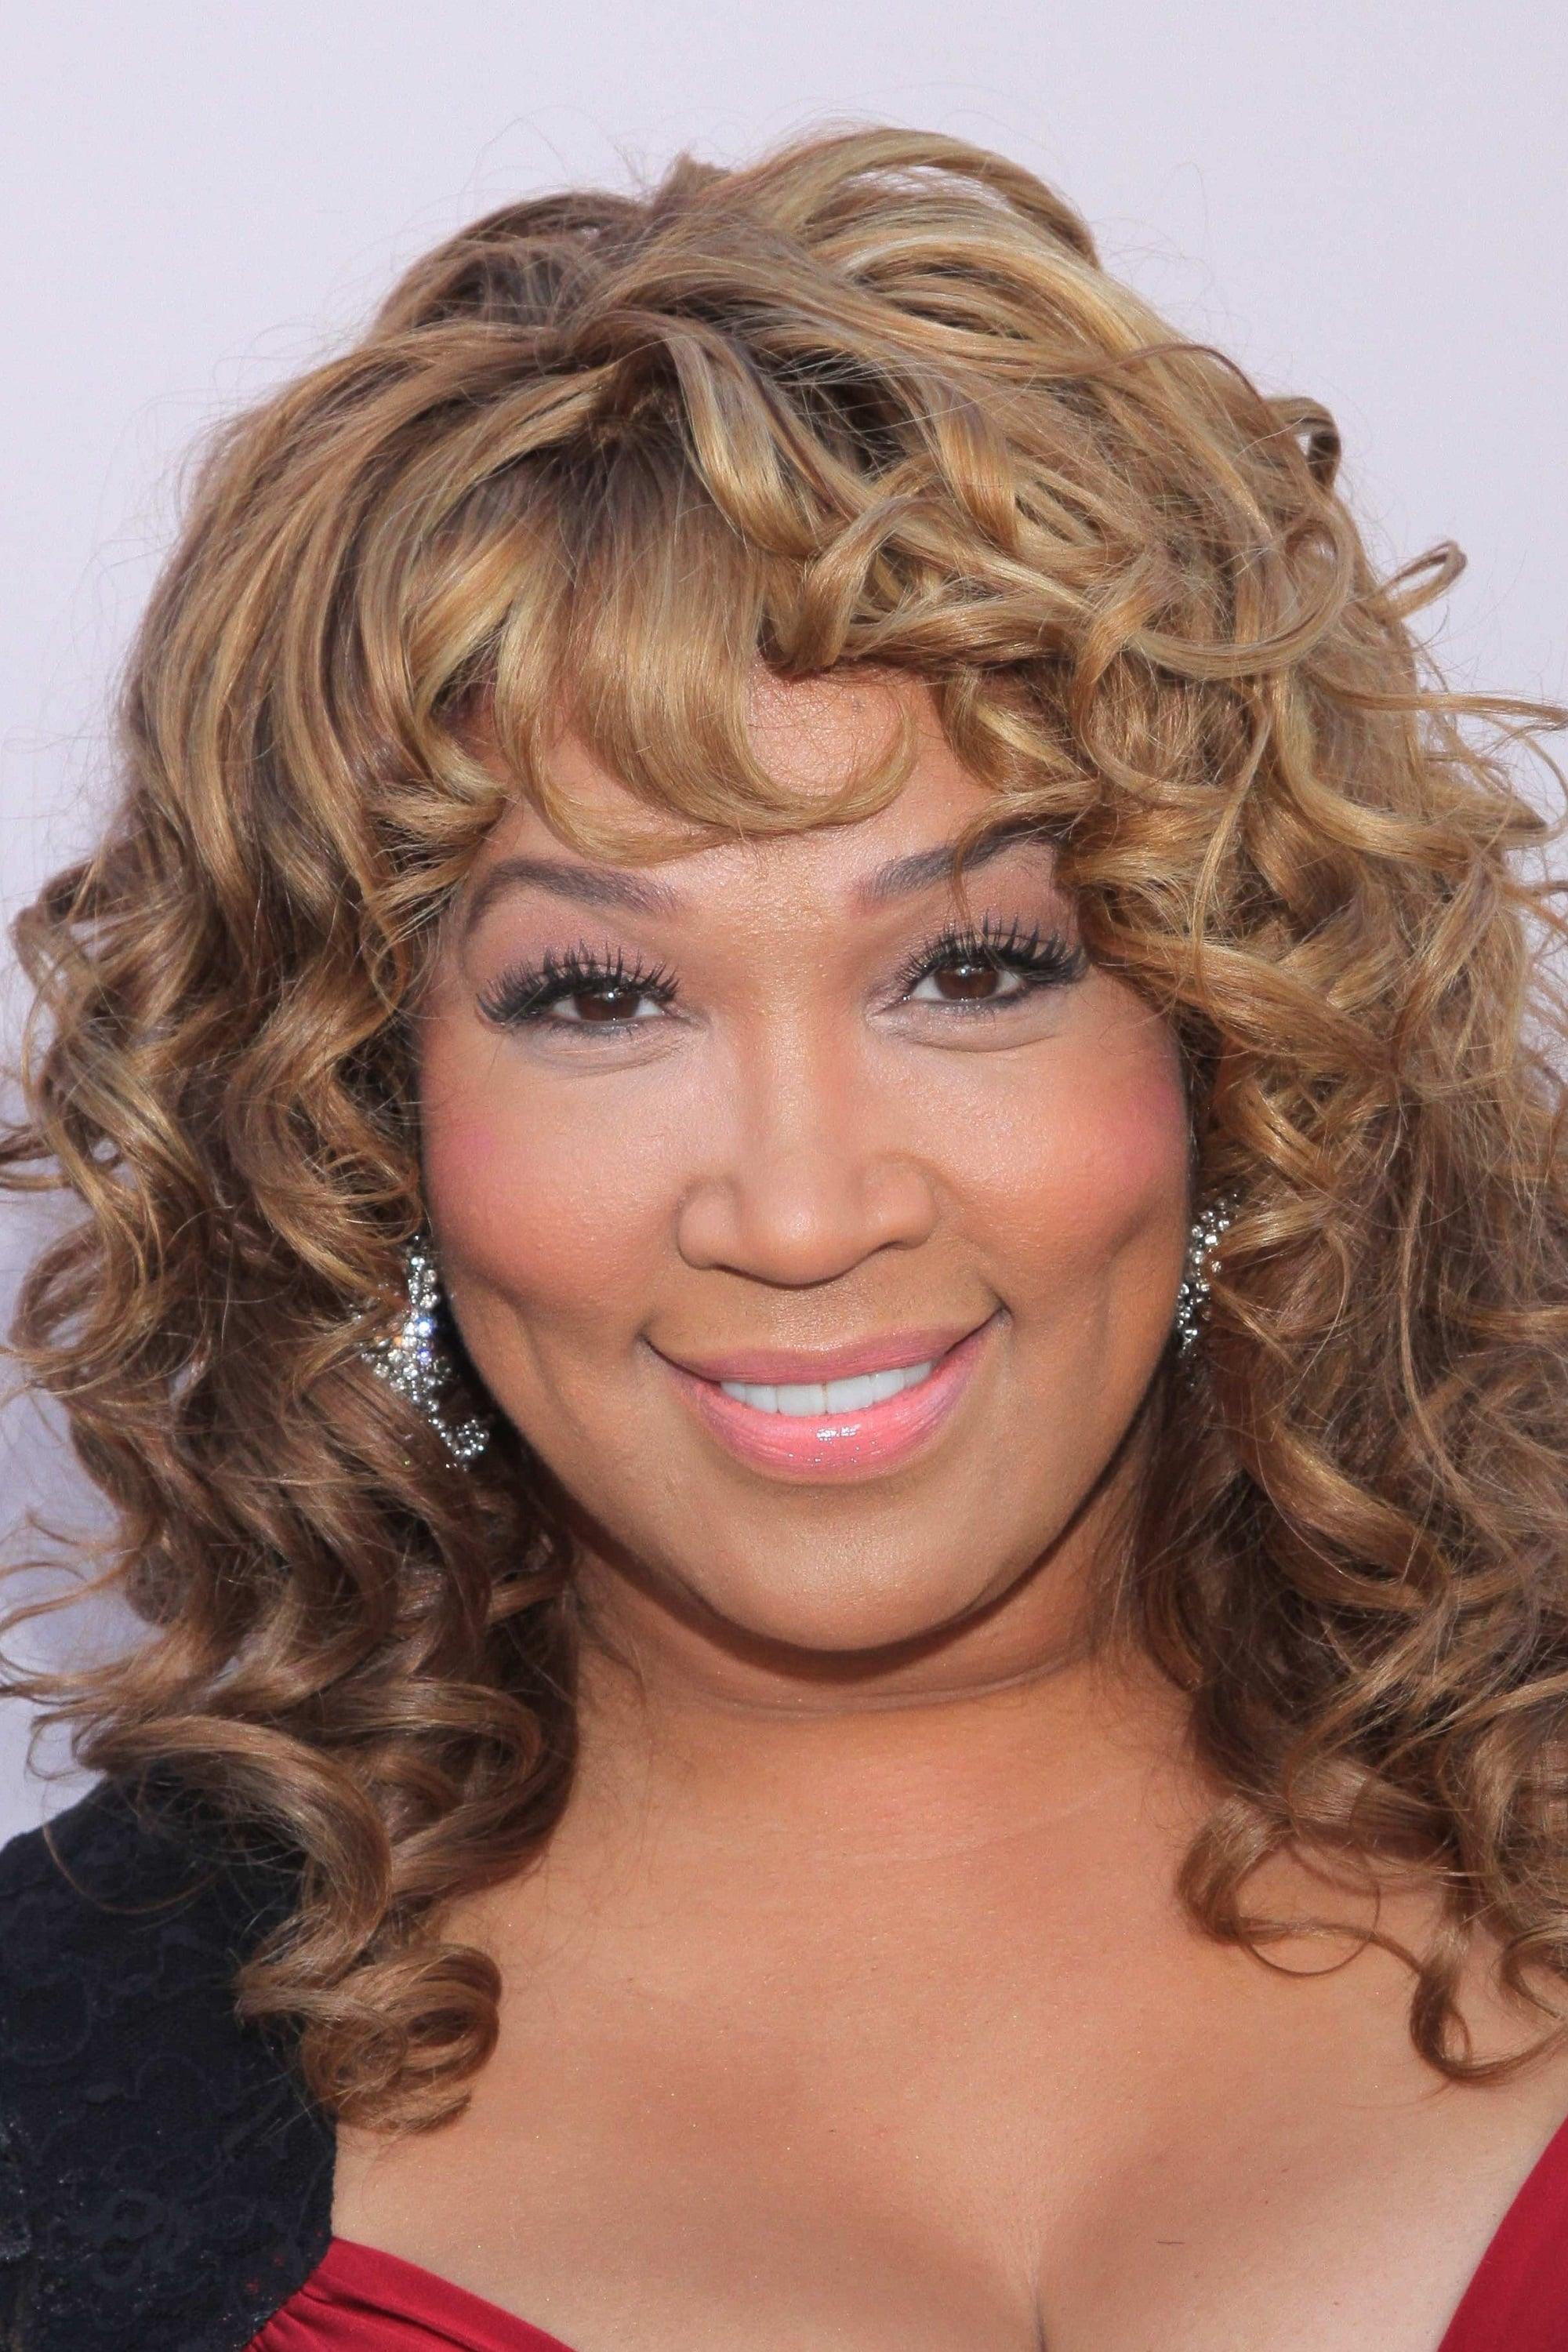 Kym Whitley poster